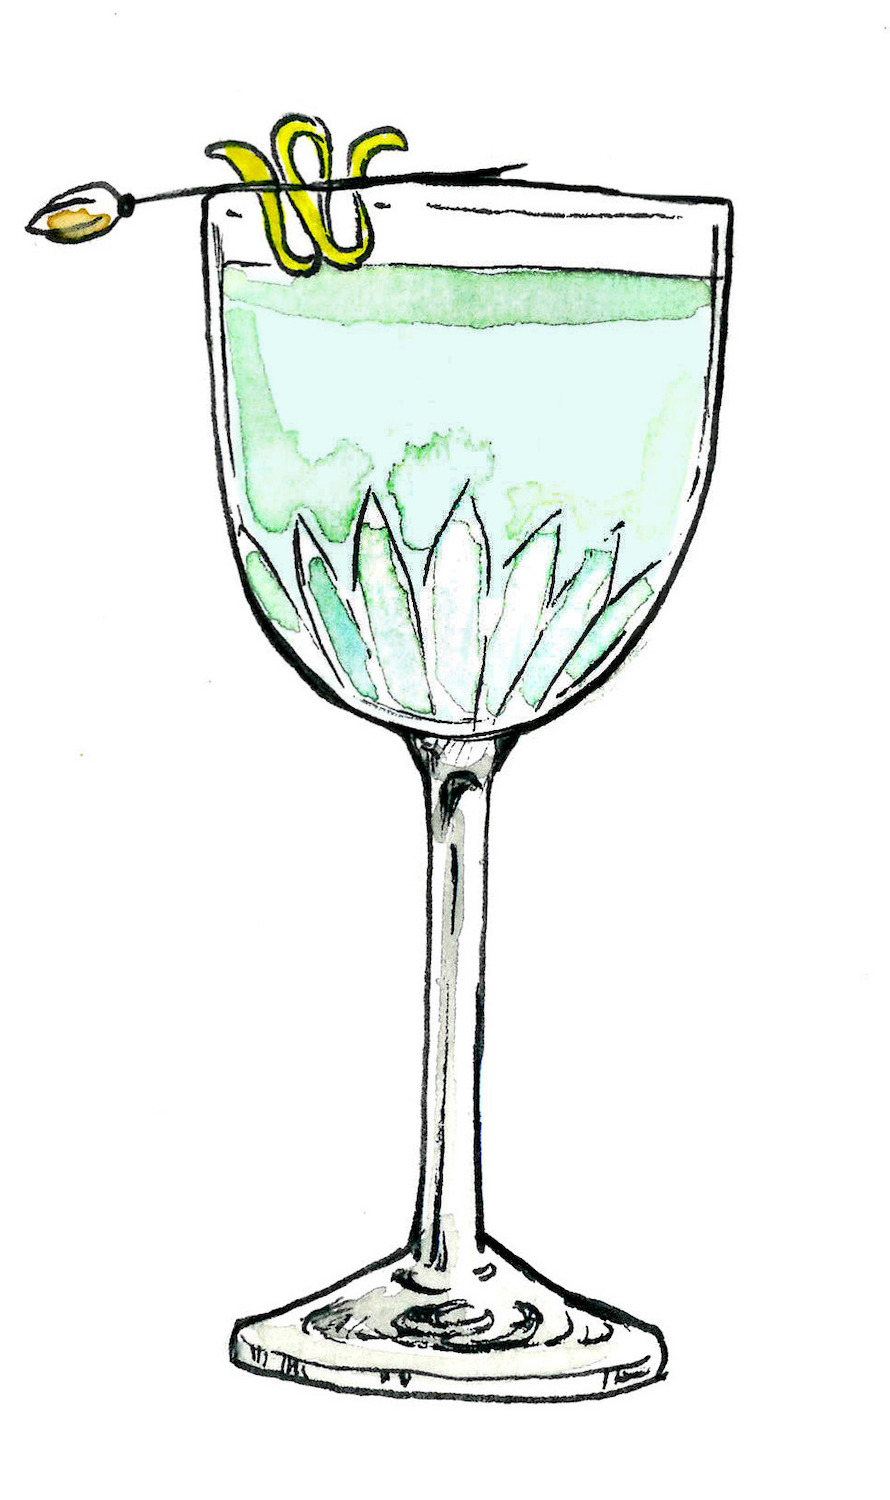 Illustration of historic alcoholic glass, the Nick and Nora